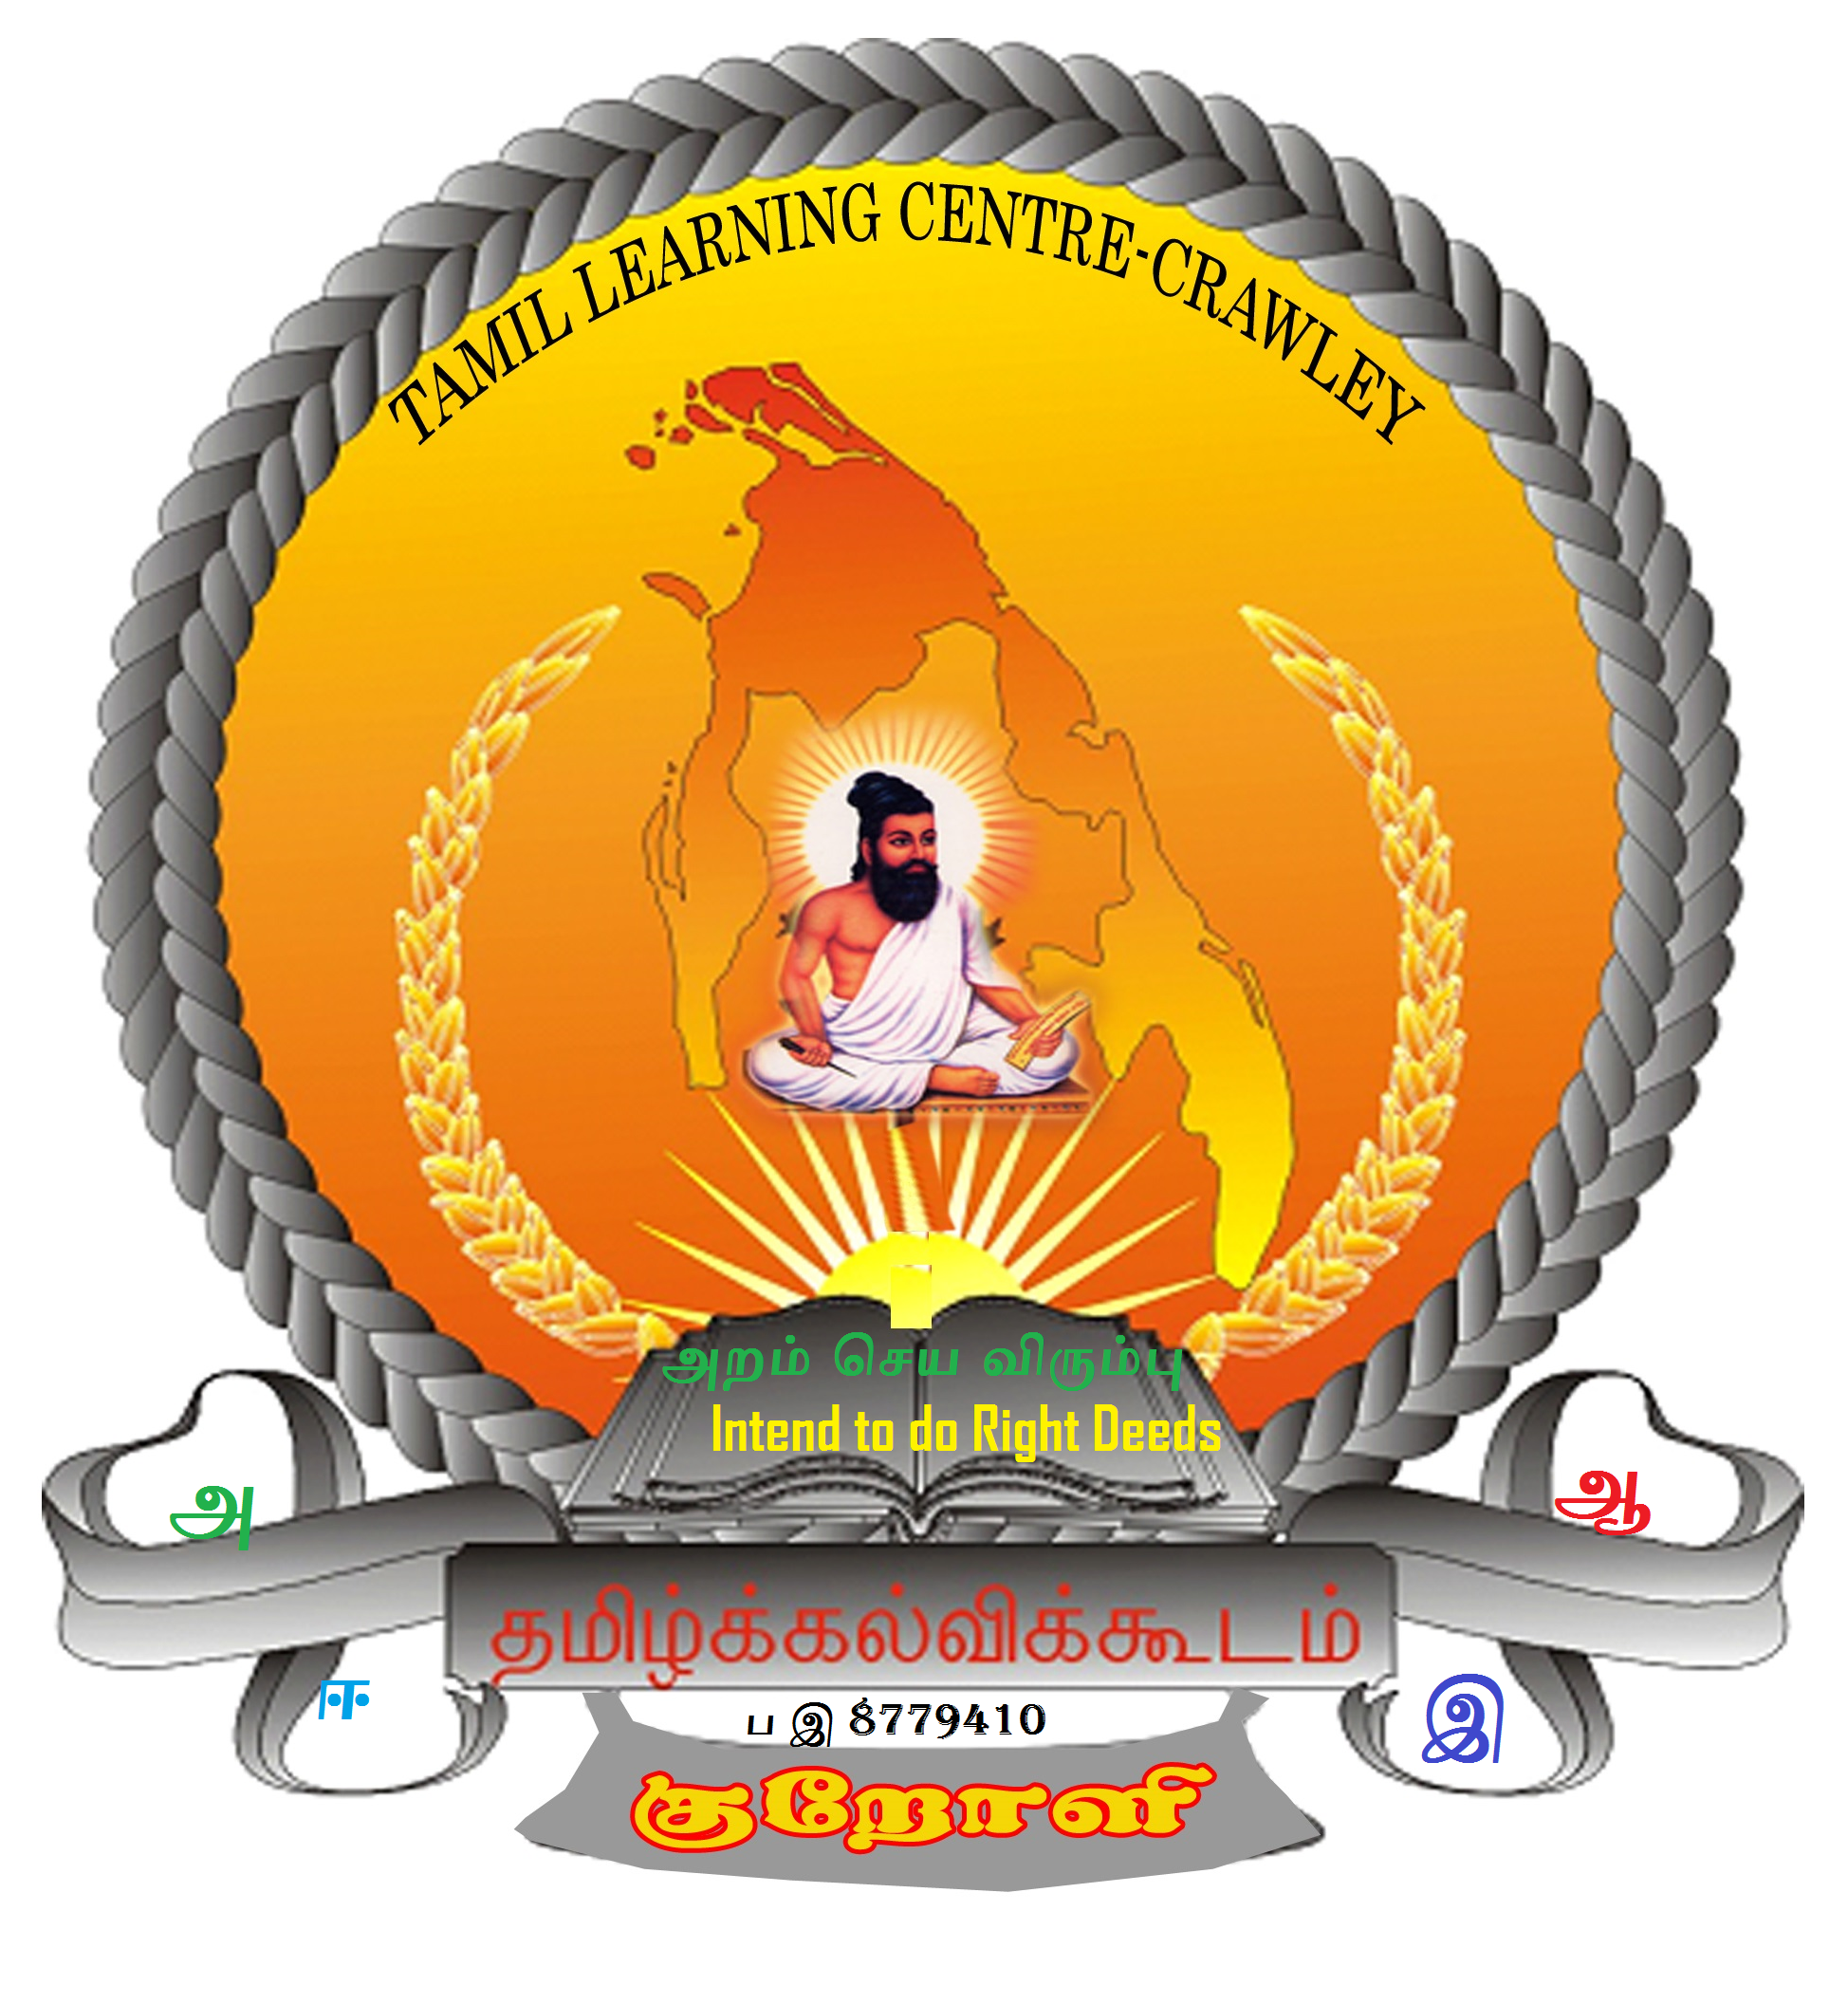 Tamil Learning Centre